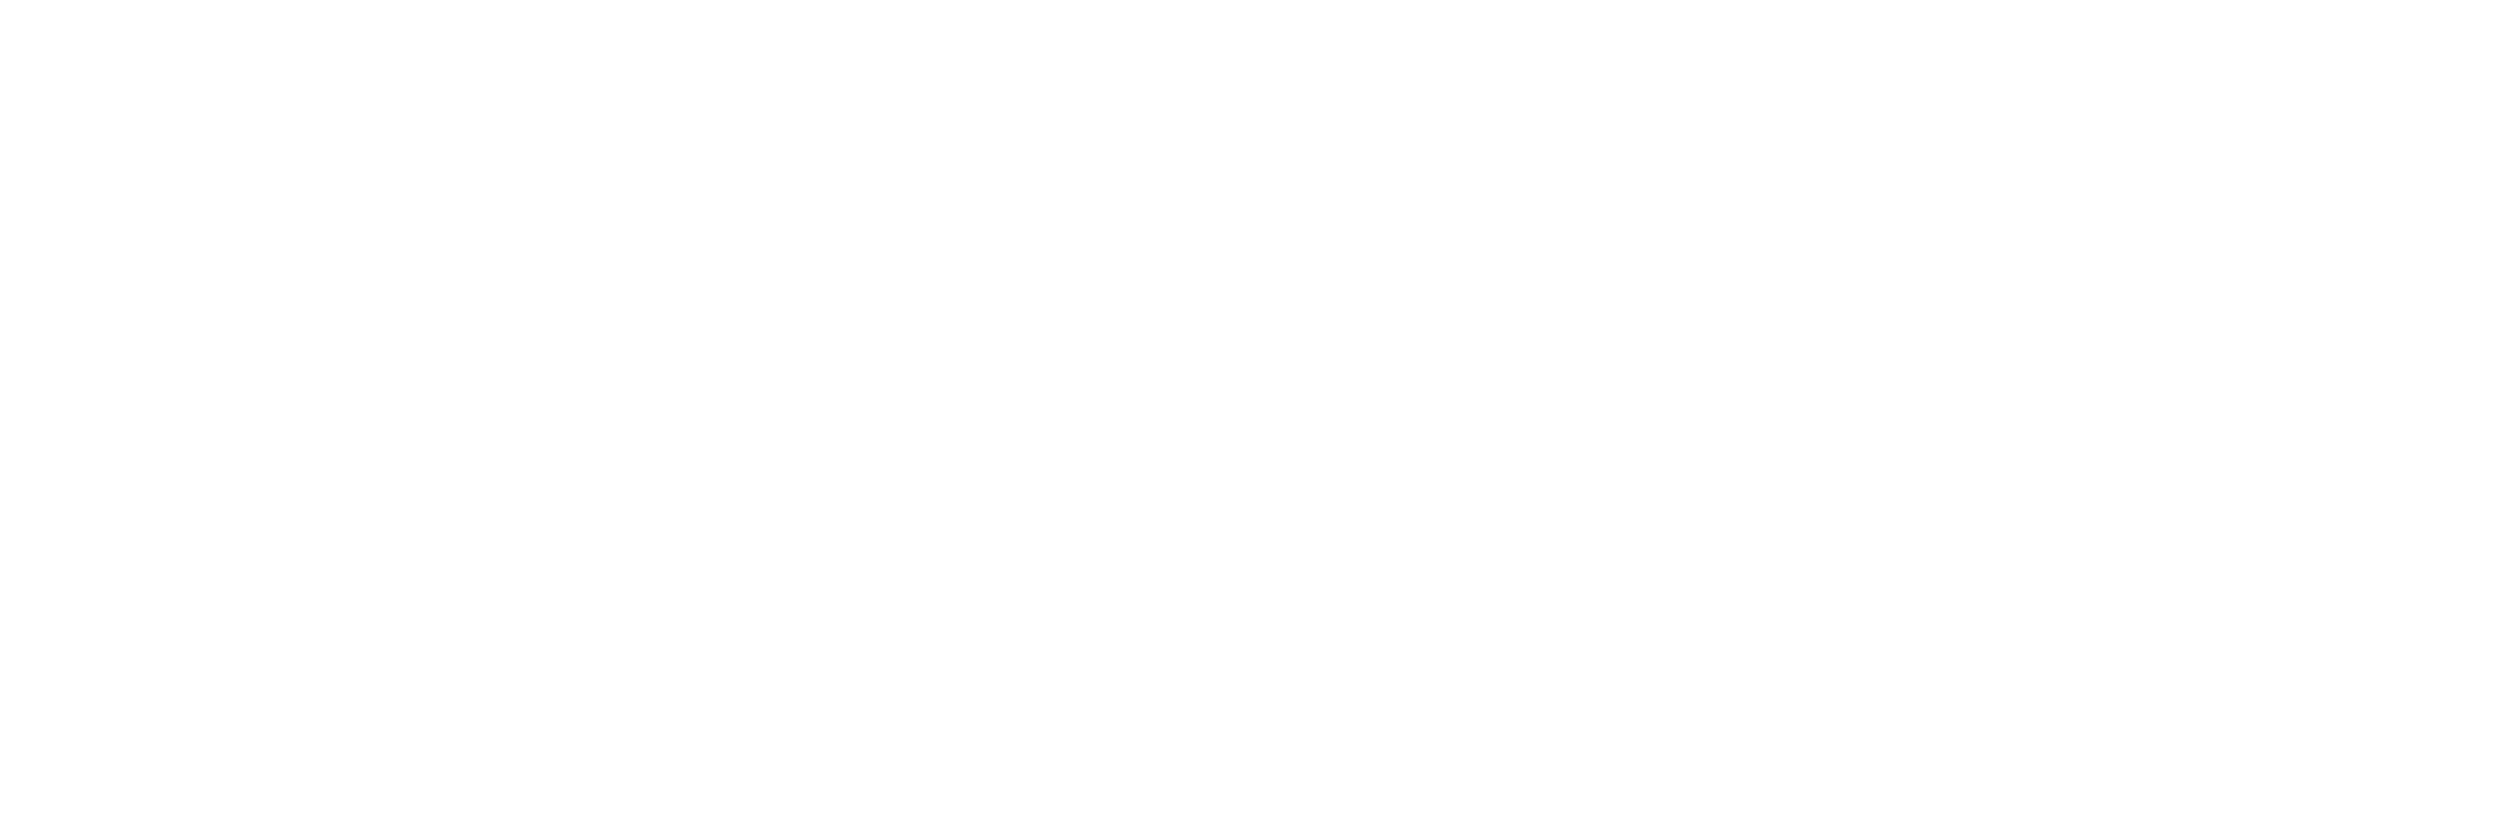 CANAMOCONCENTRATESWORDMARK-WHITE-01.png